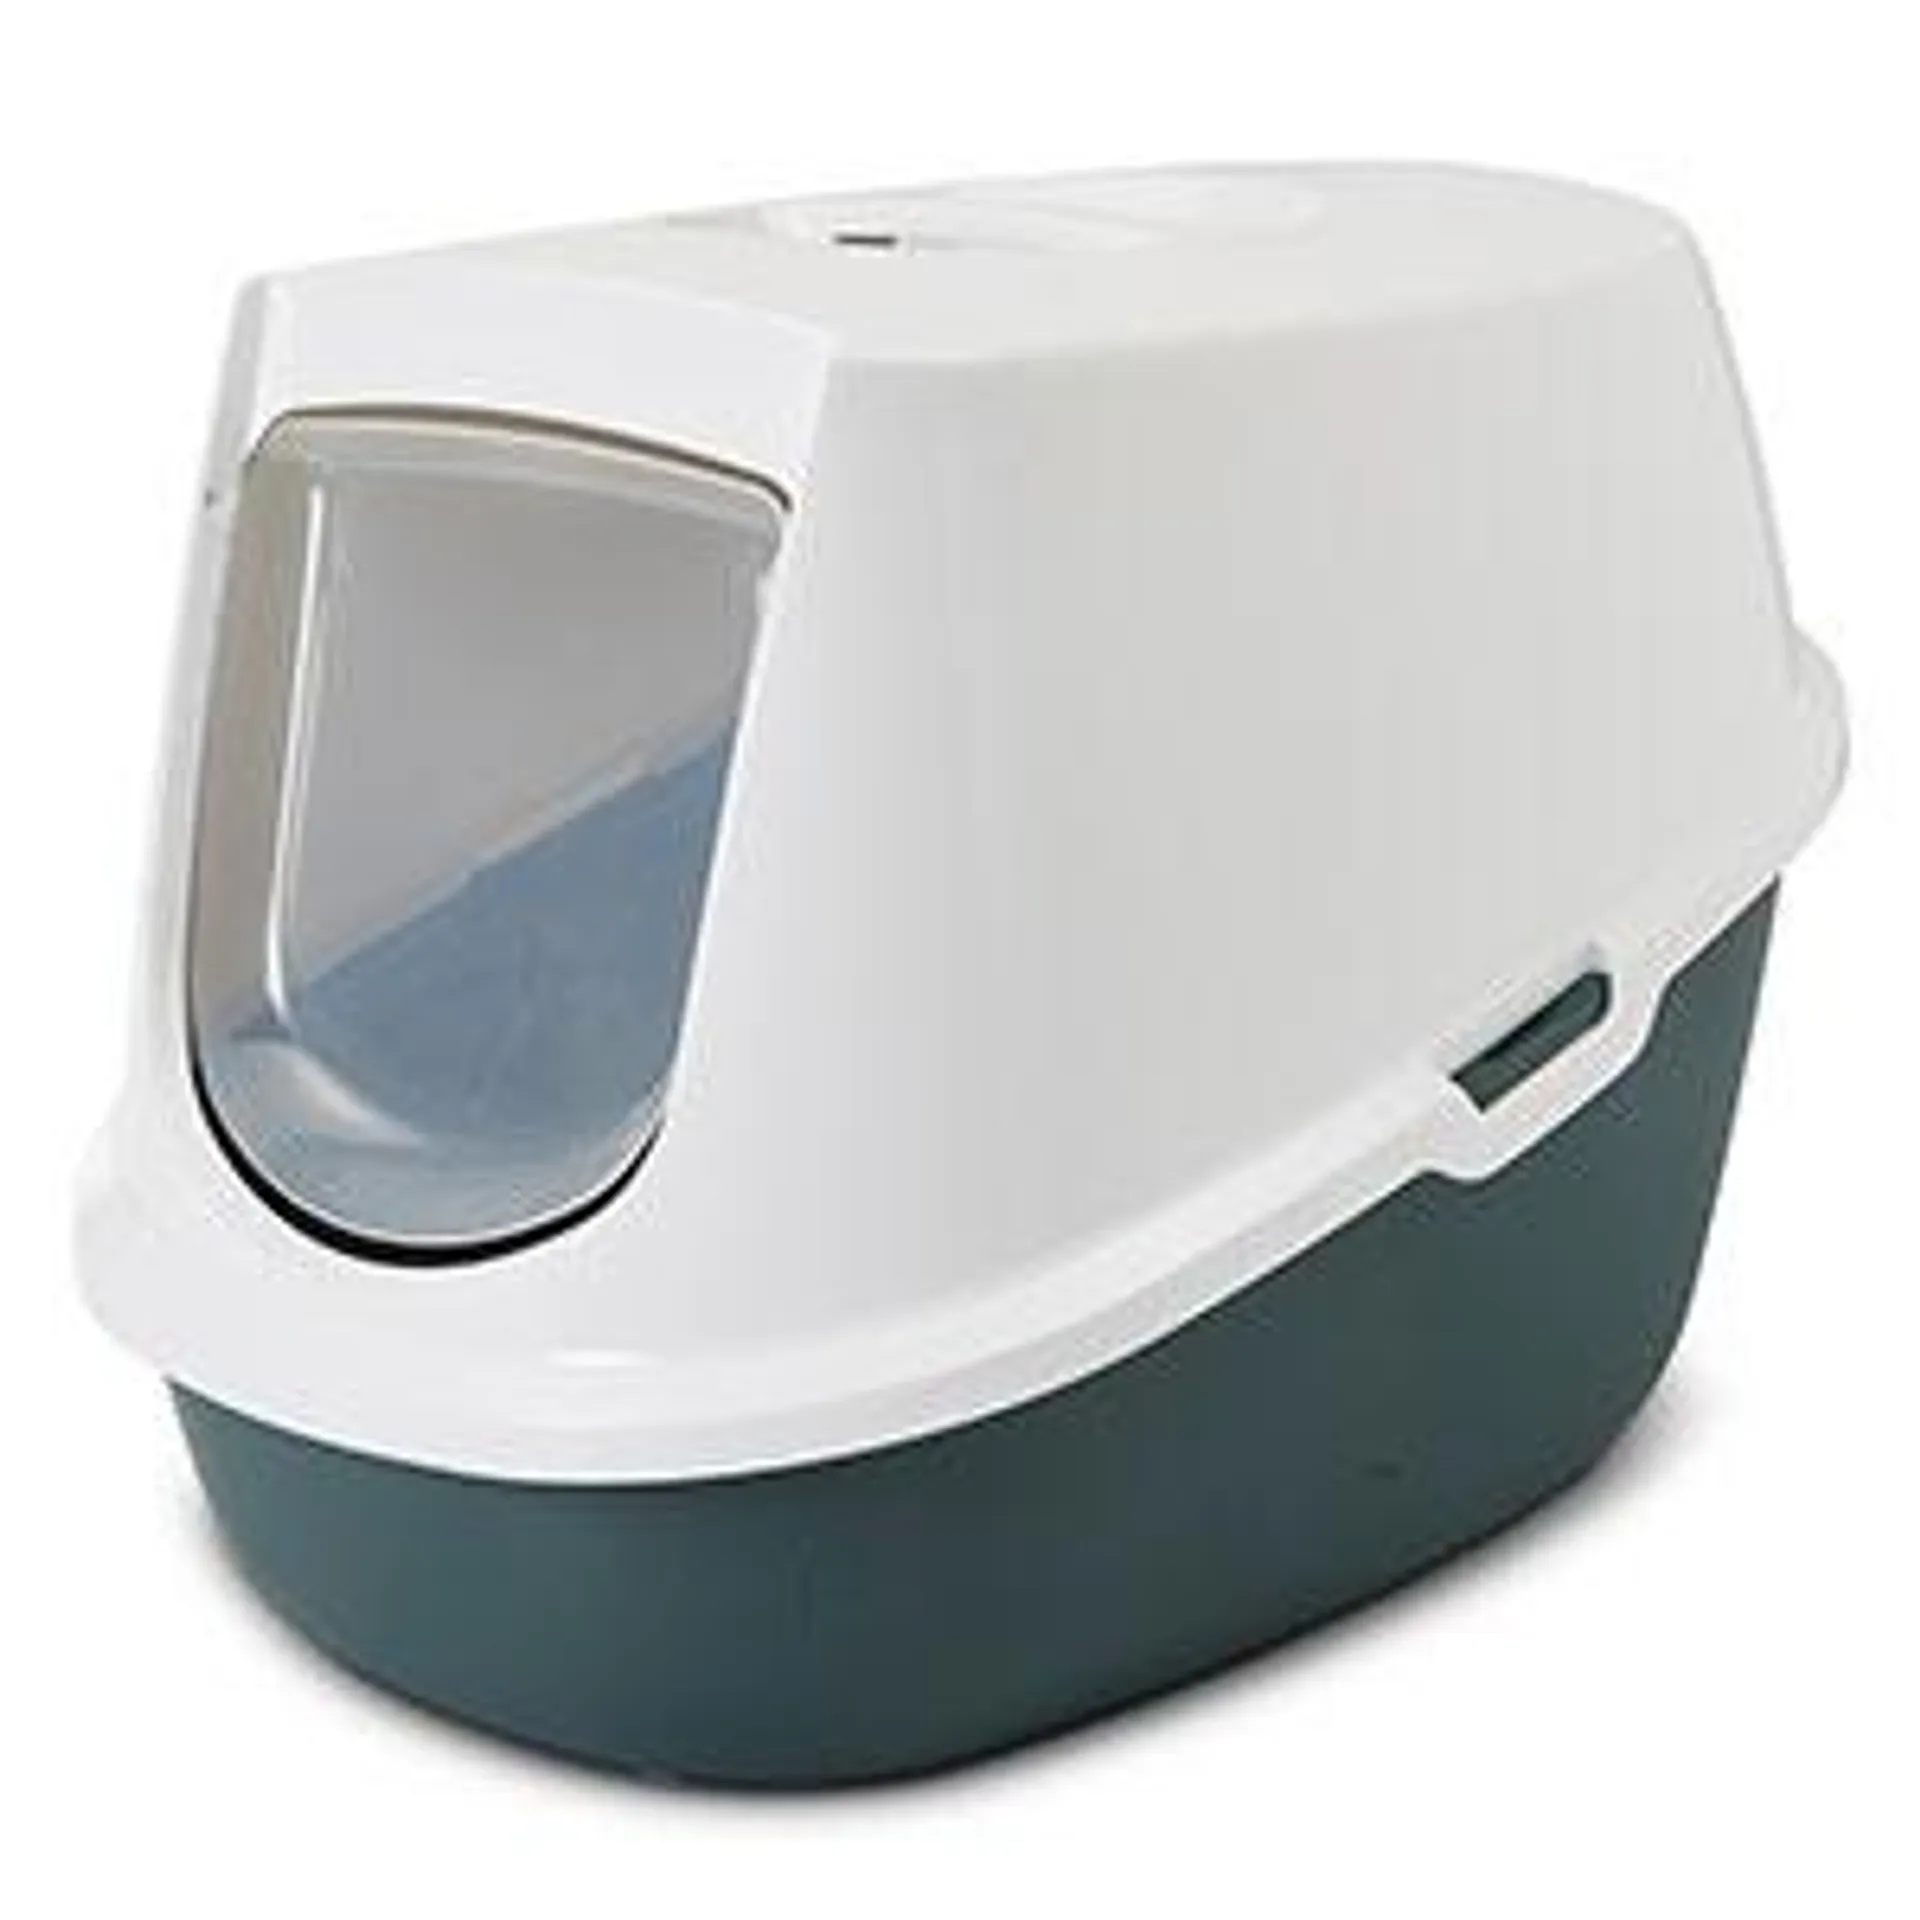 Pets at Home Basic Hooded Cat Litter Tray Green Large/X Large